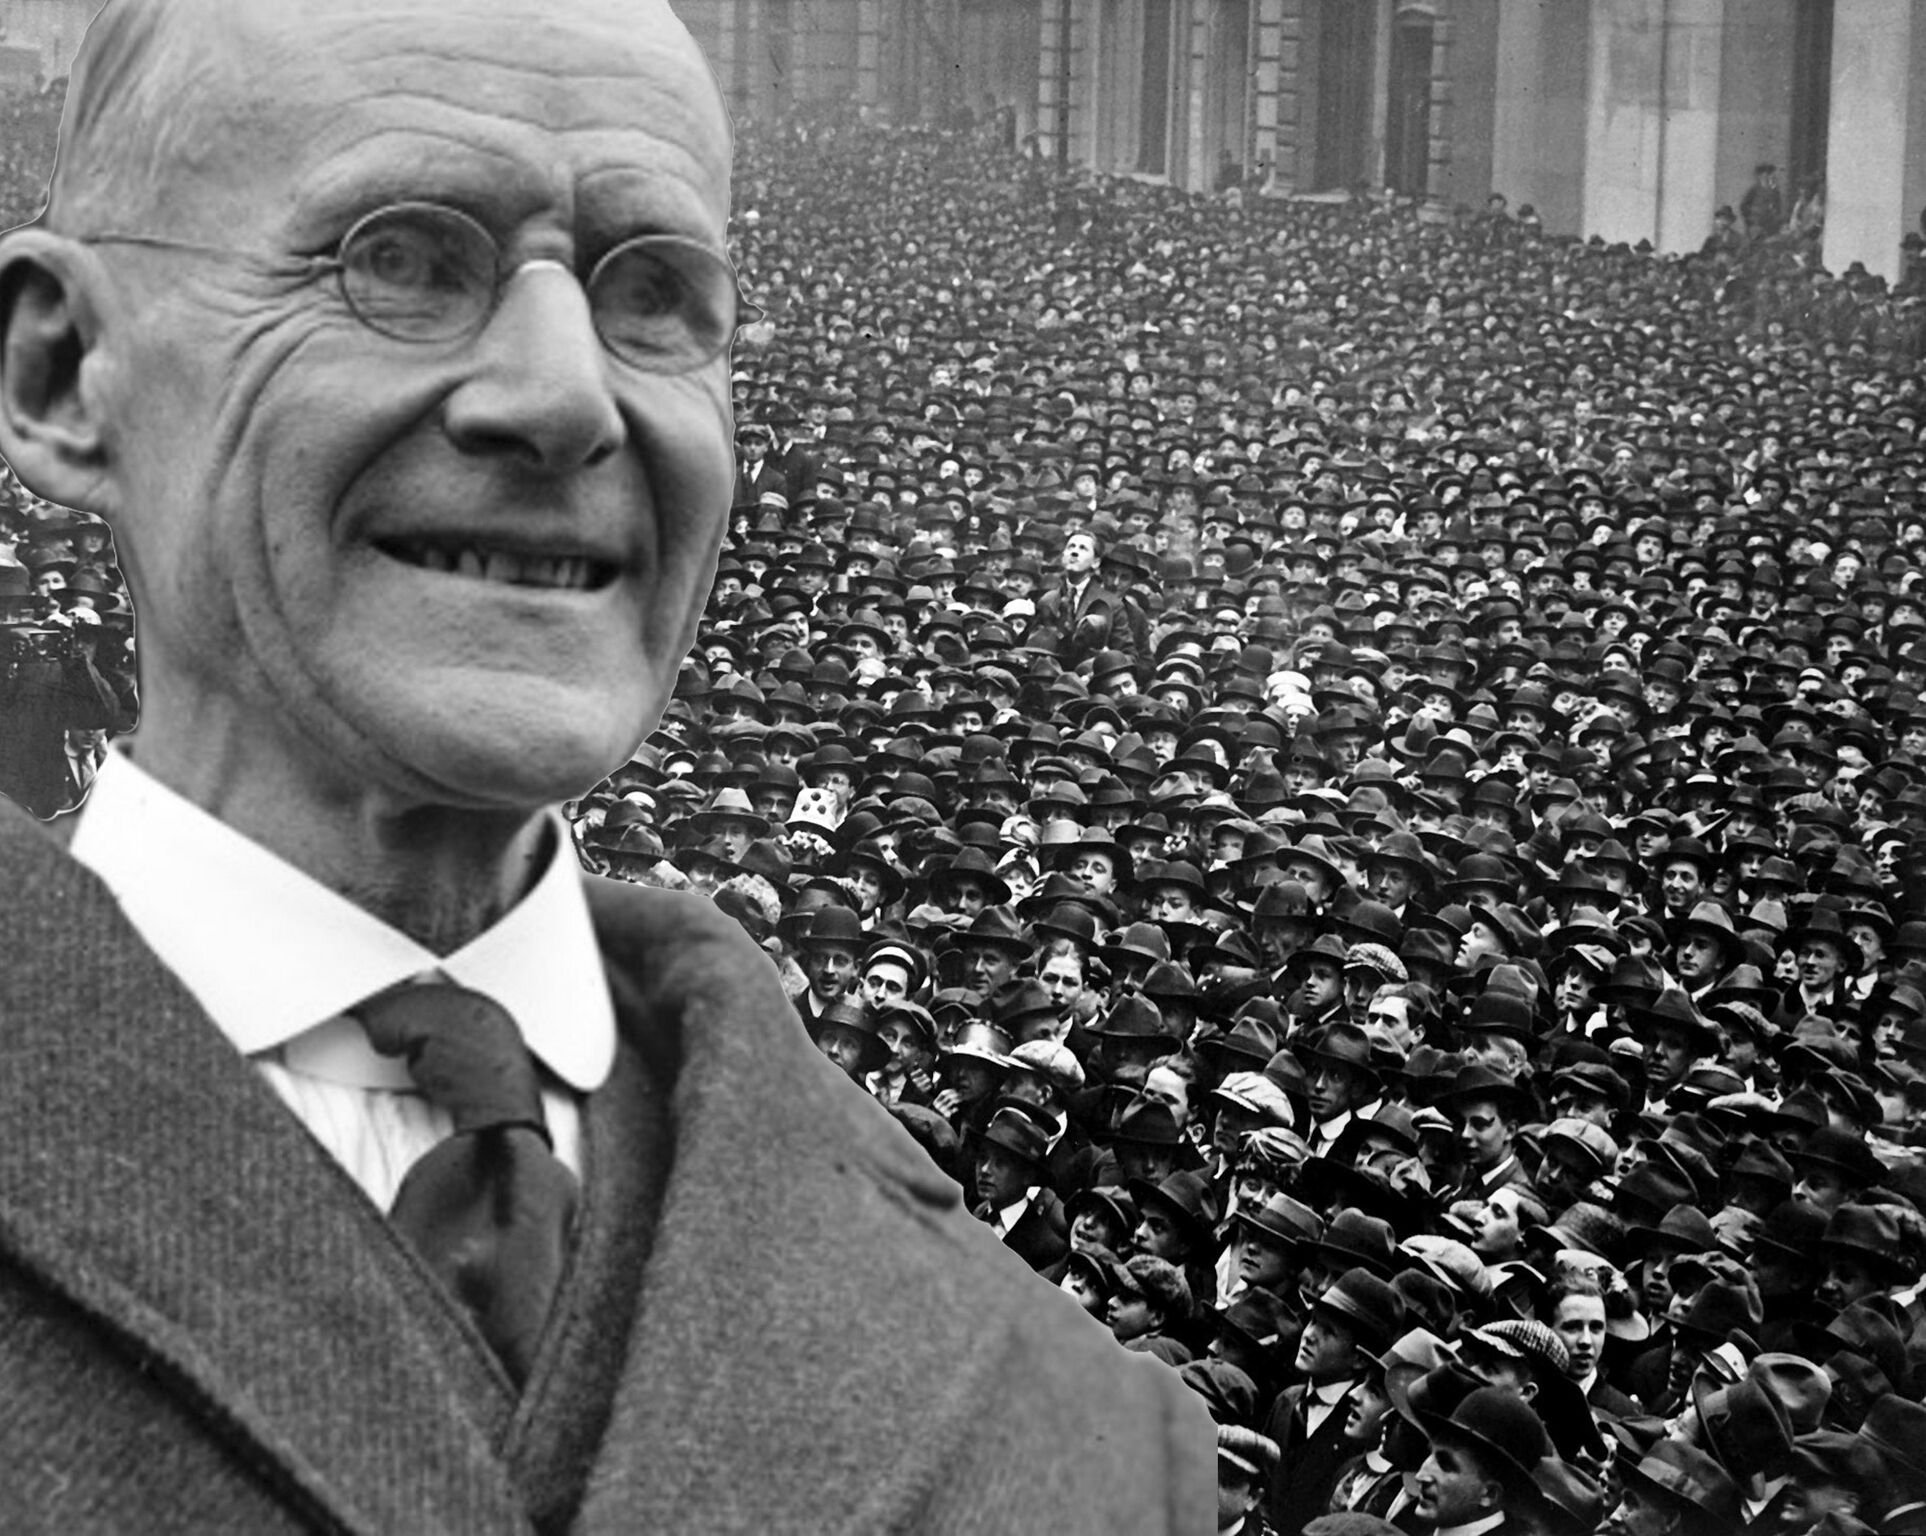 Eugene%20Debs%20With%20Crowd%20in%20Chicago_preview.jpeg